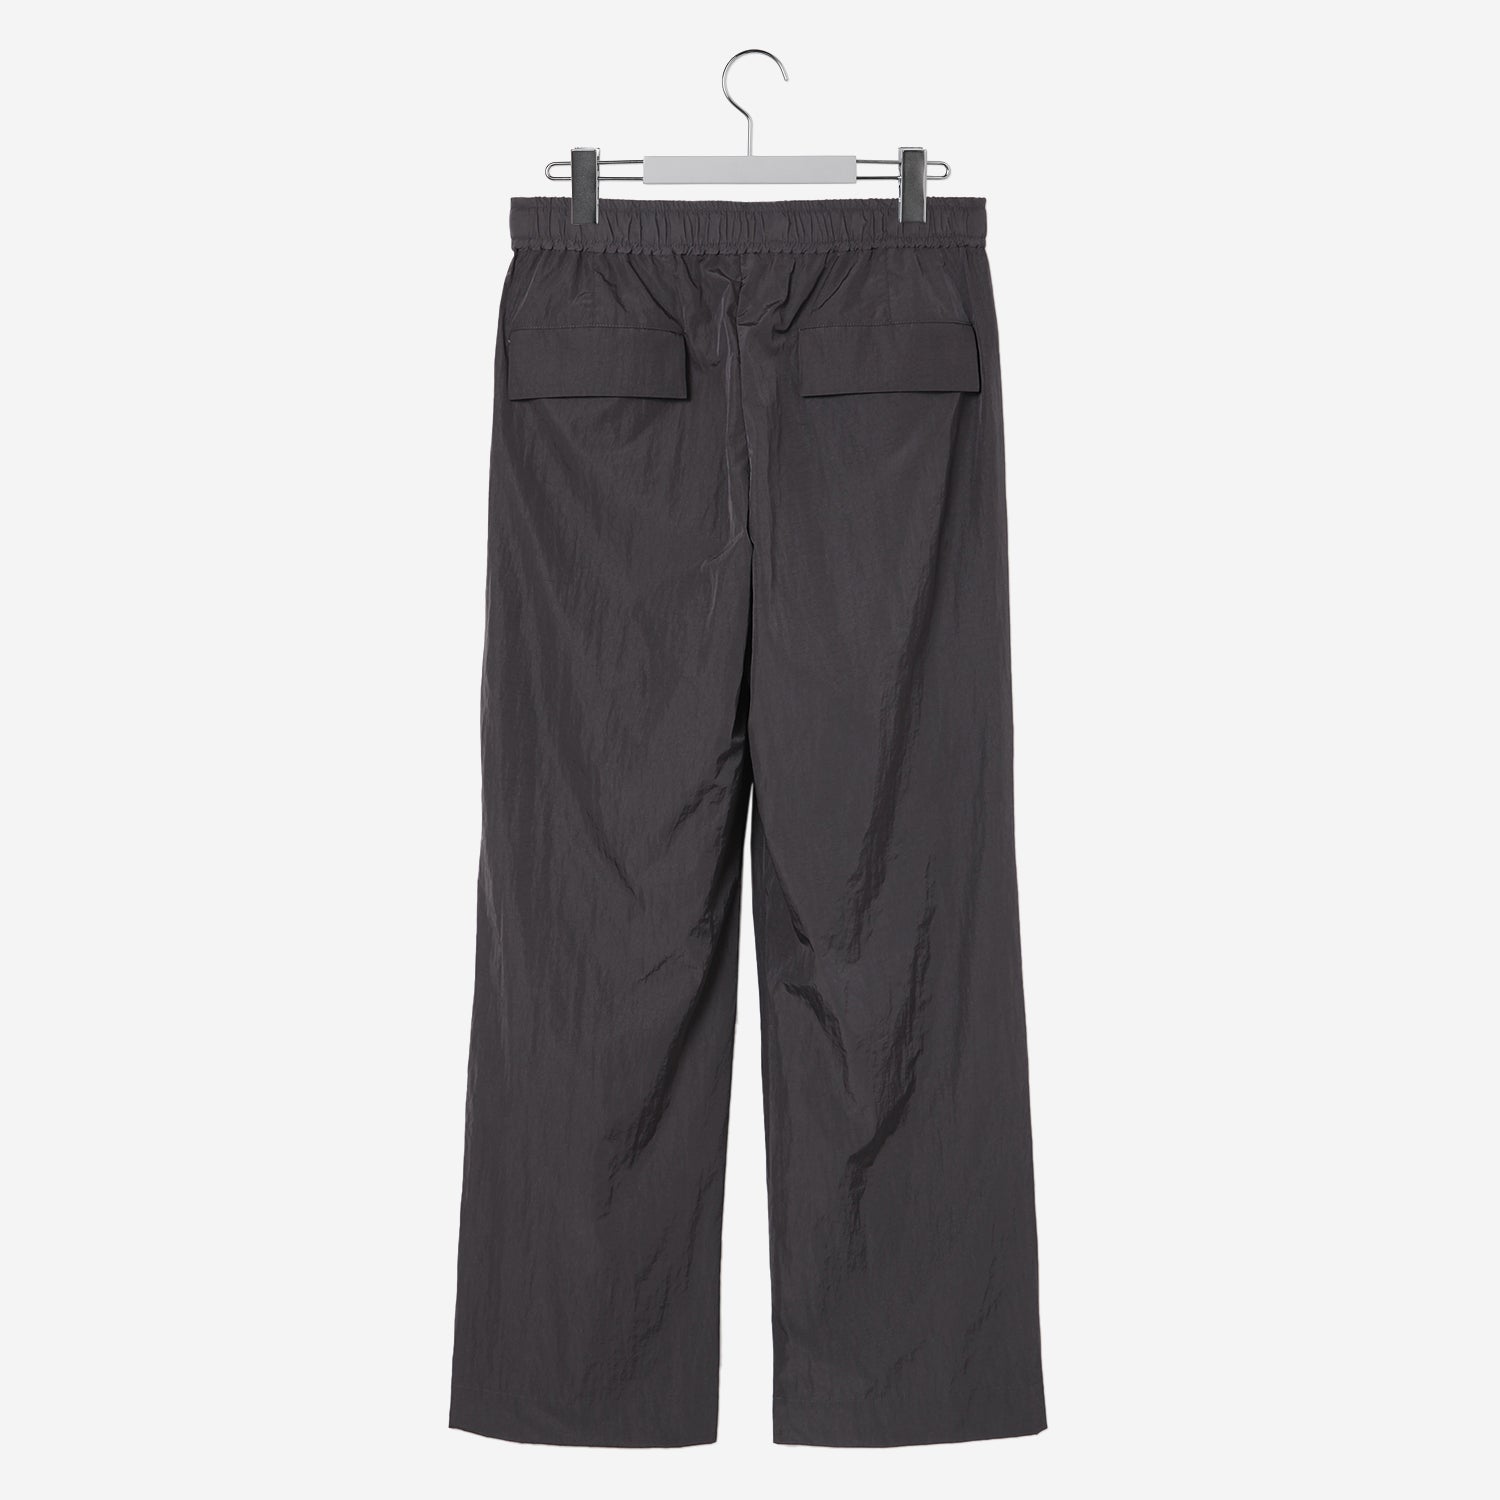 QUINN / Wide Tailored Pants / gray – th products